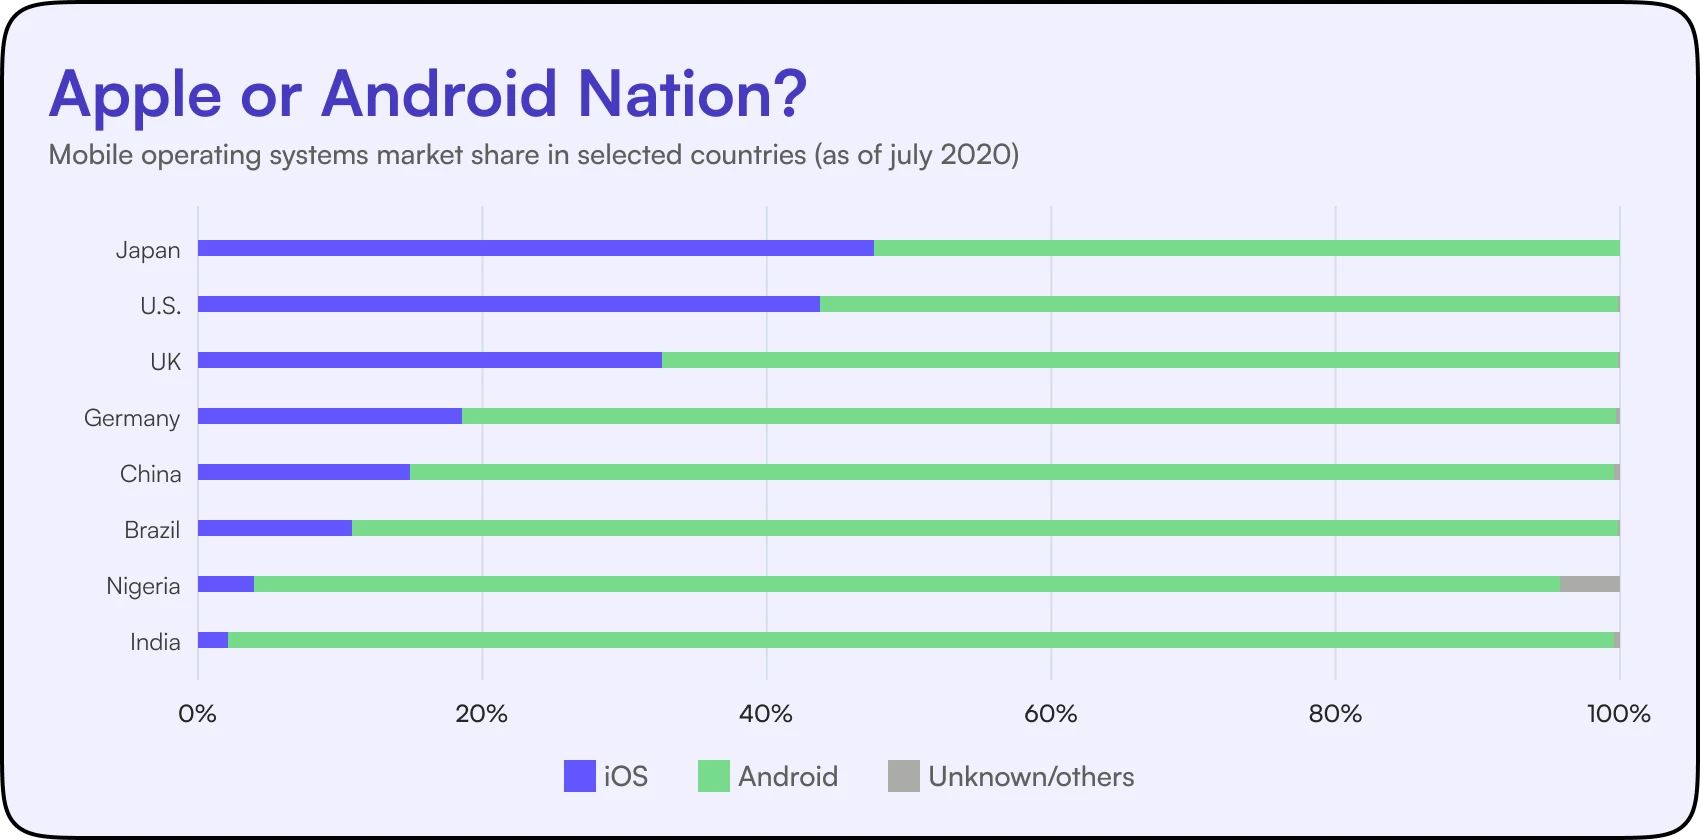 Mobile operating systems market share in selected countries, as of july 2020